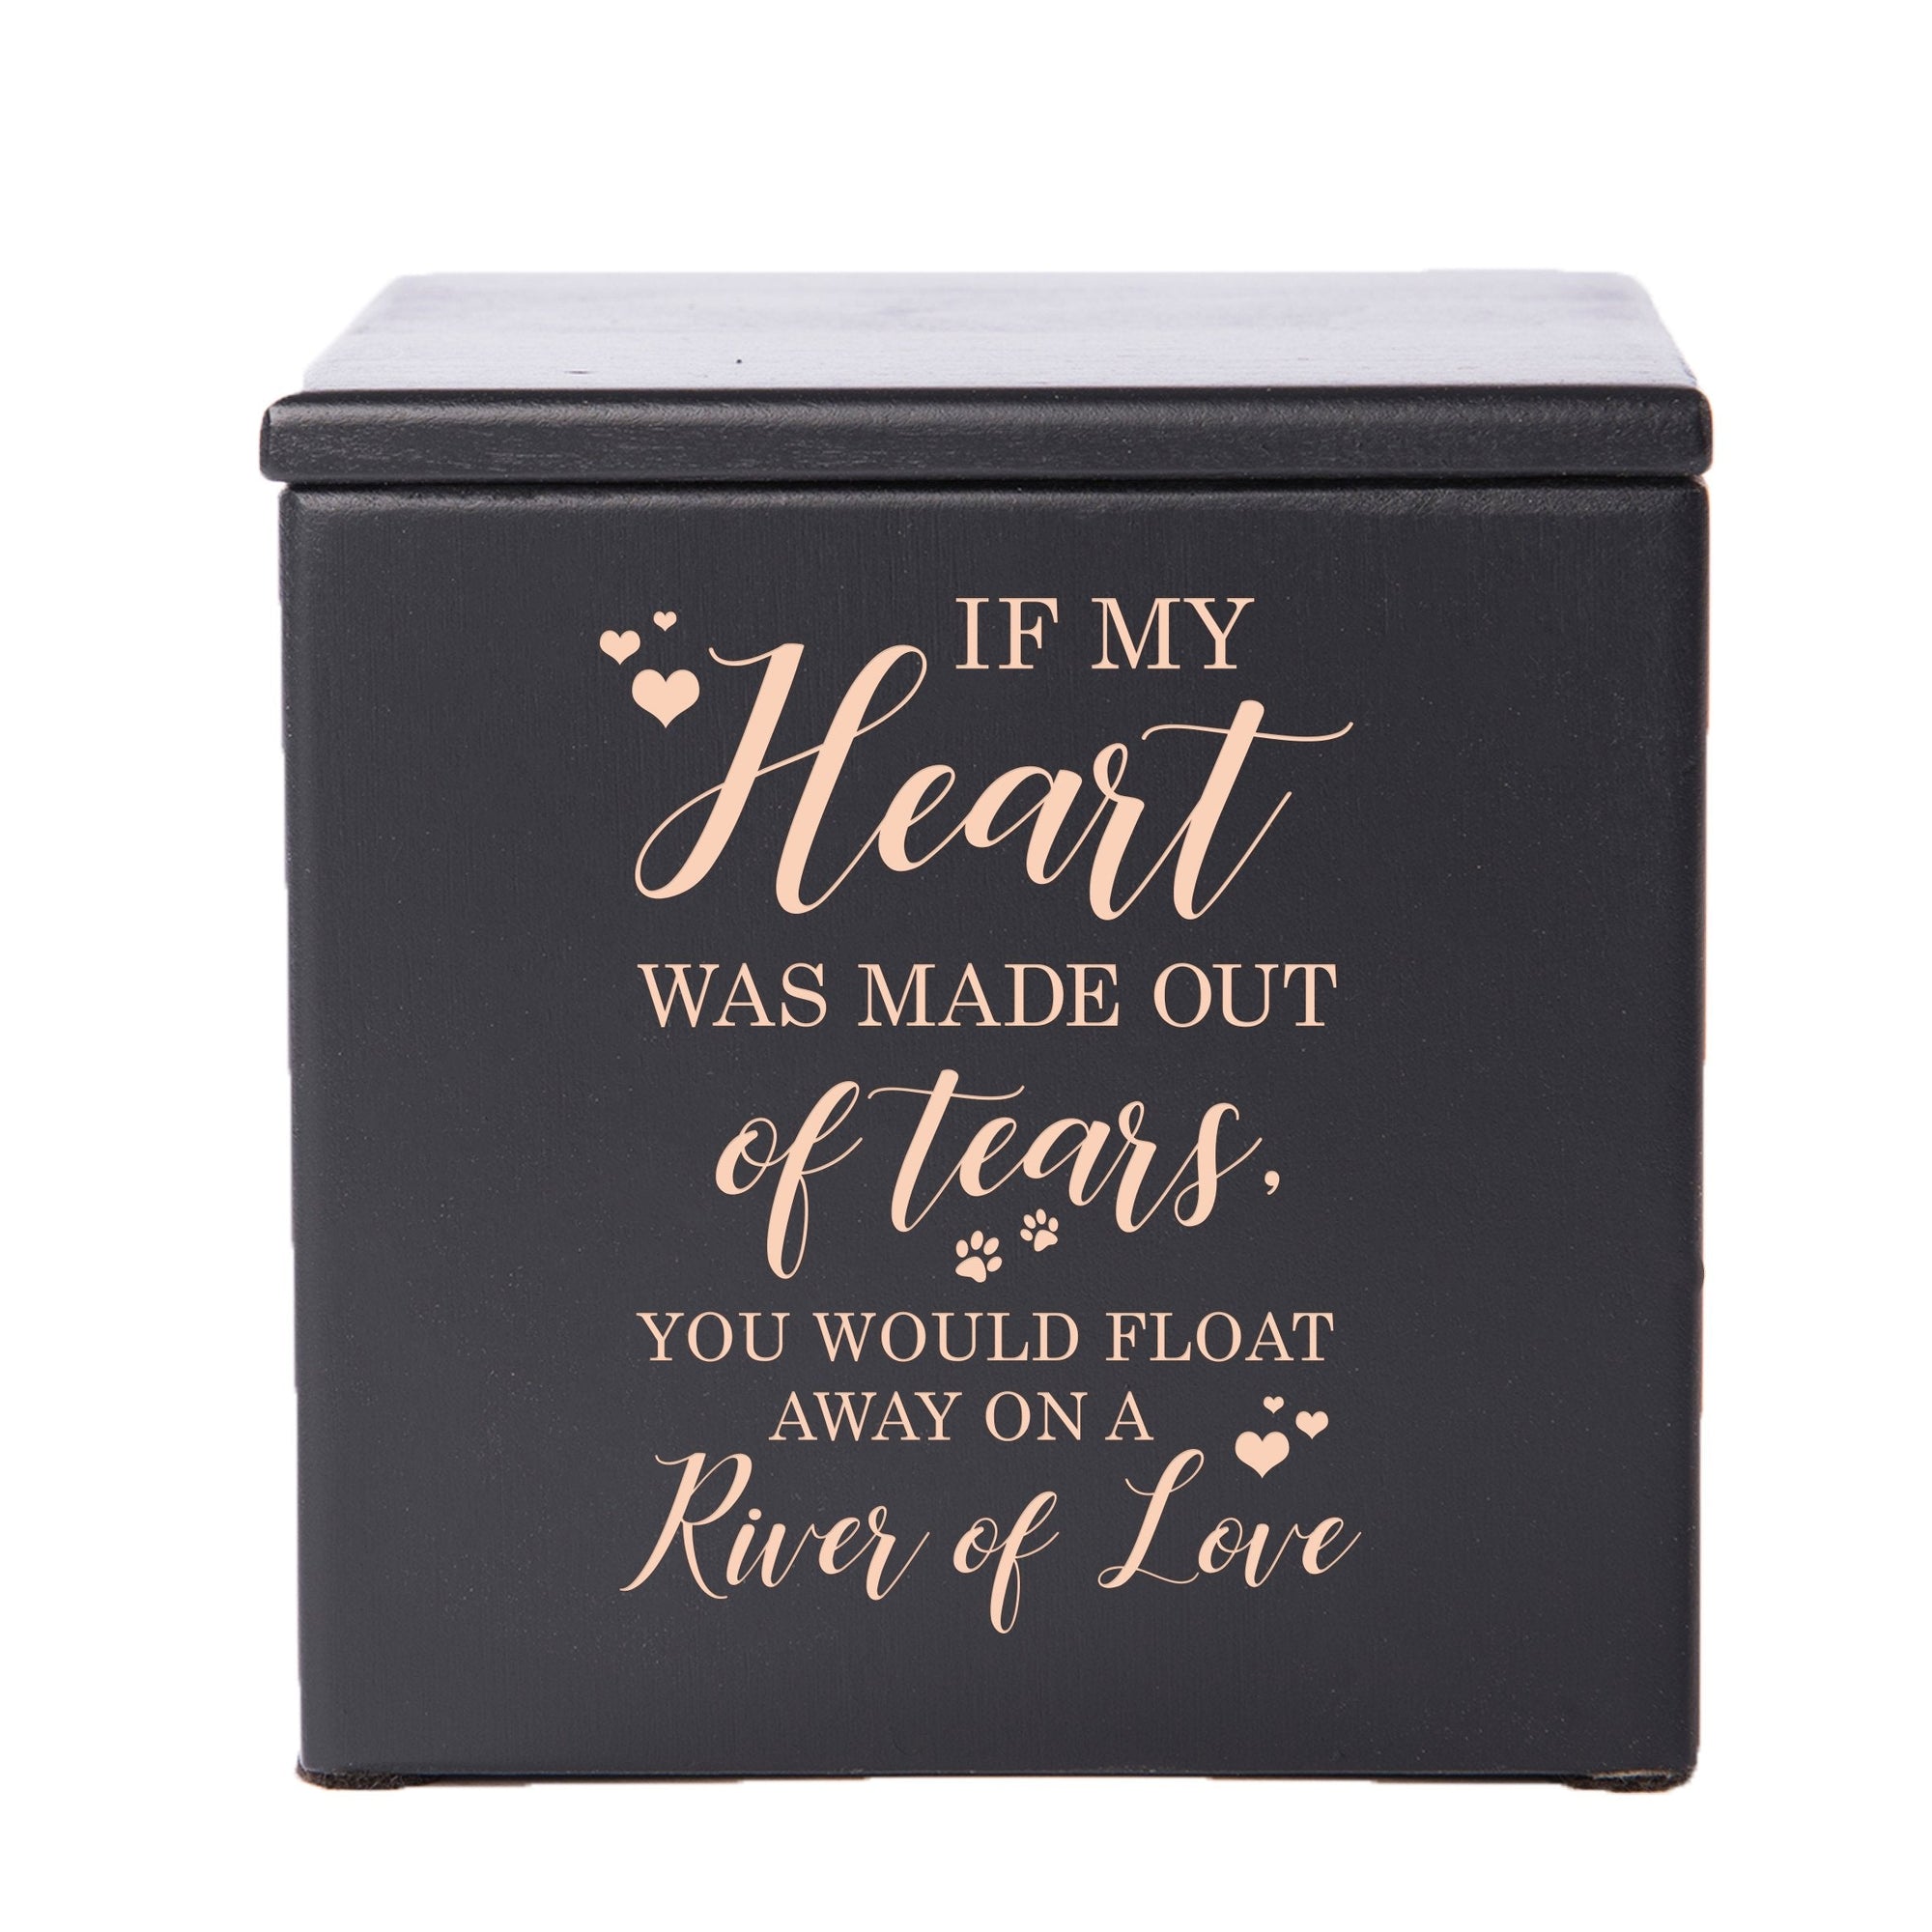 Black Pet Memorial 3.5x3.5 Keepsake Urn with phrase "If My Heart Was Made Out of Tears"